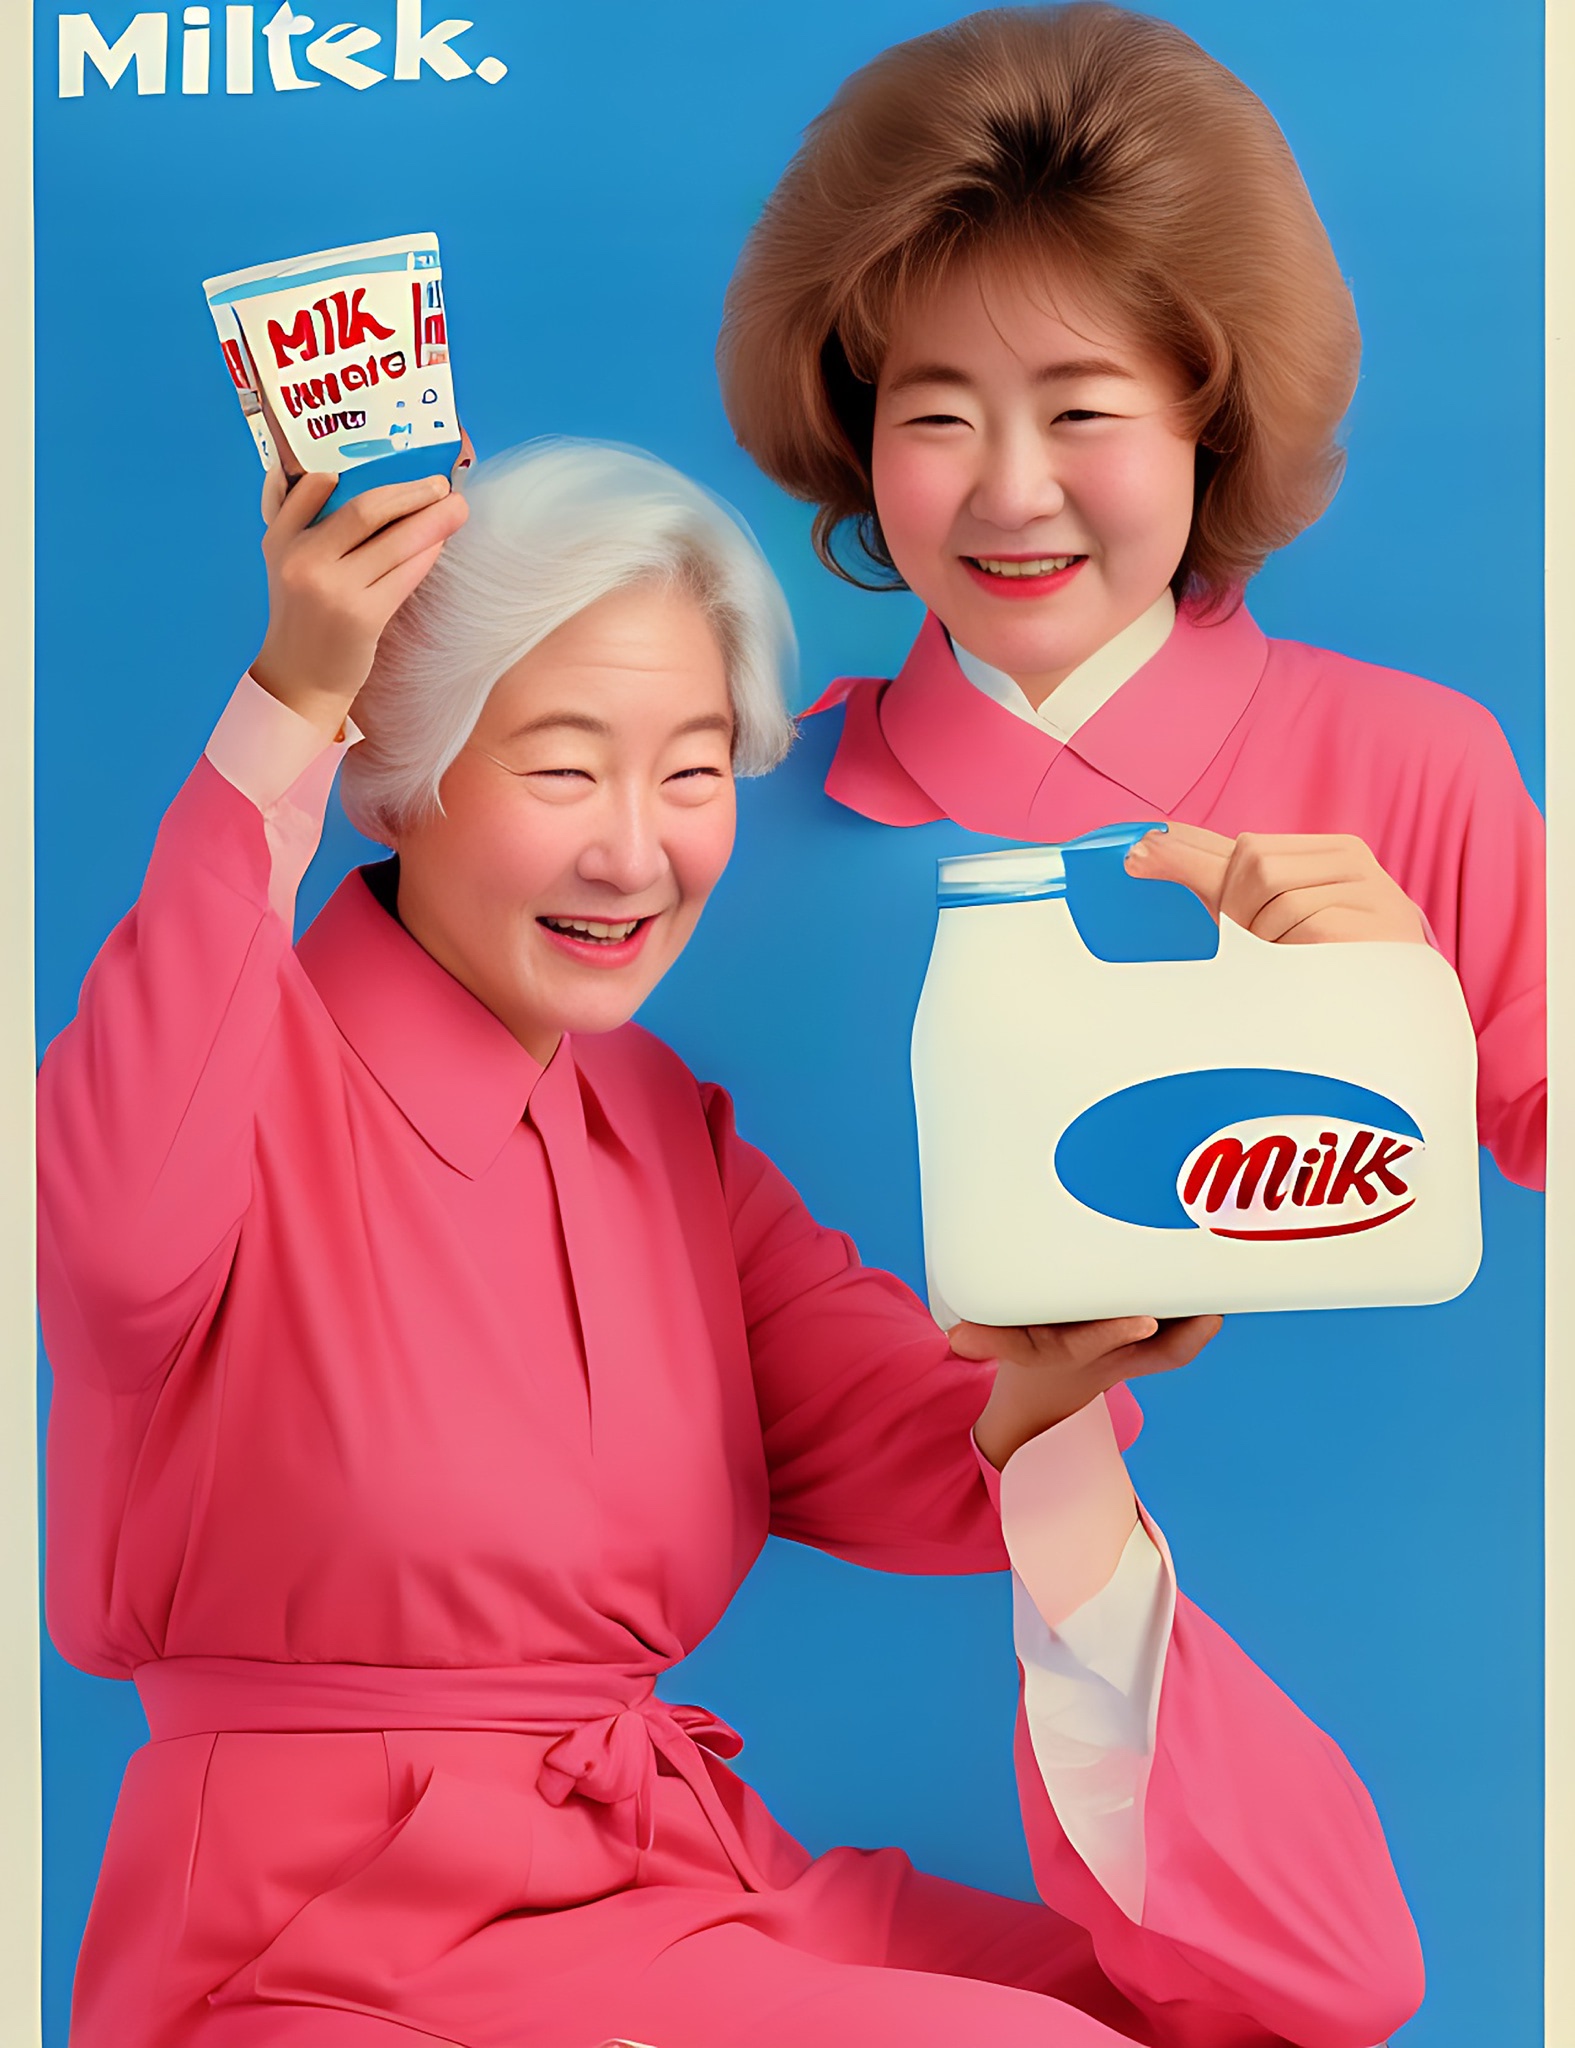 1980s-advertisement-for-milk-with-a-old-woman-South-Korea